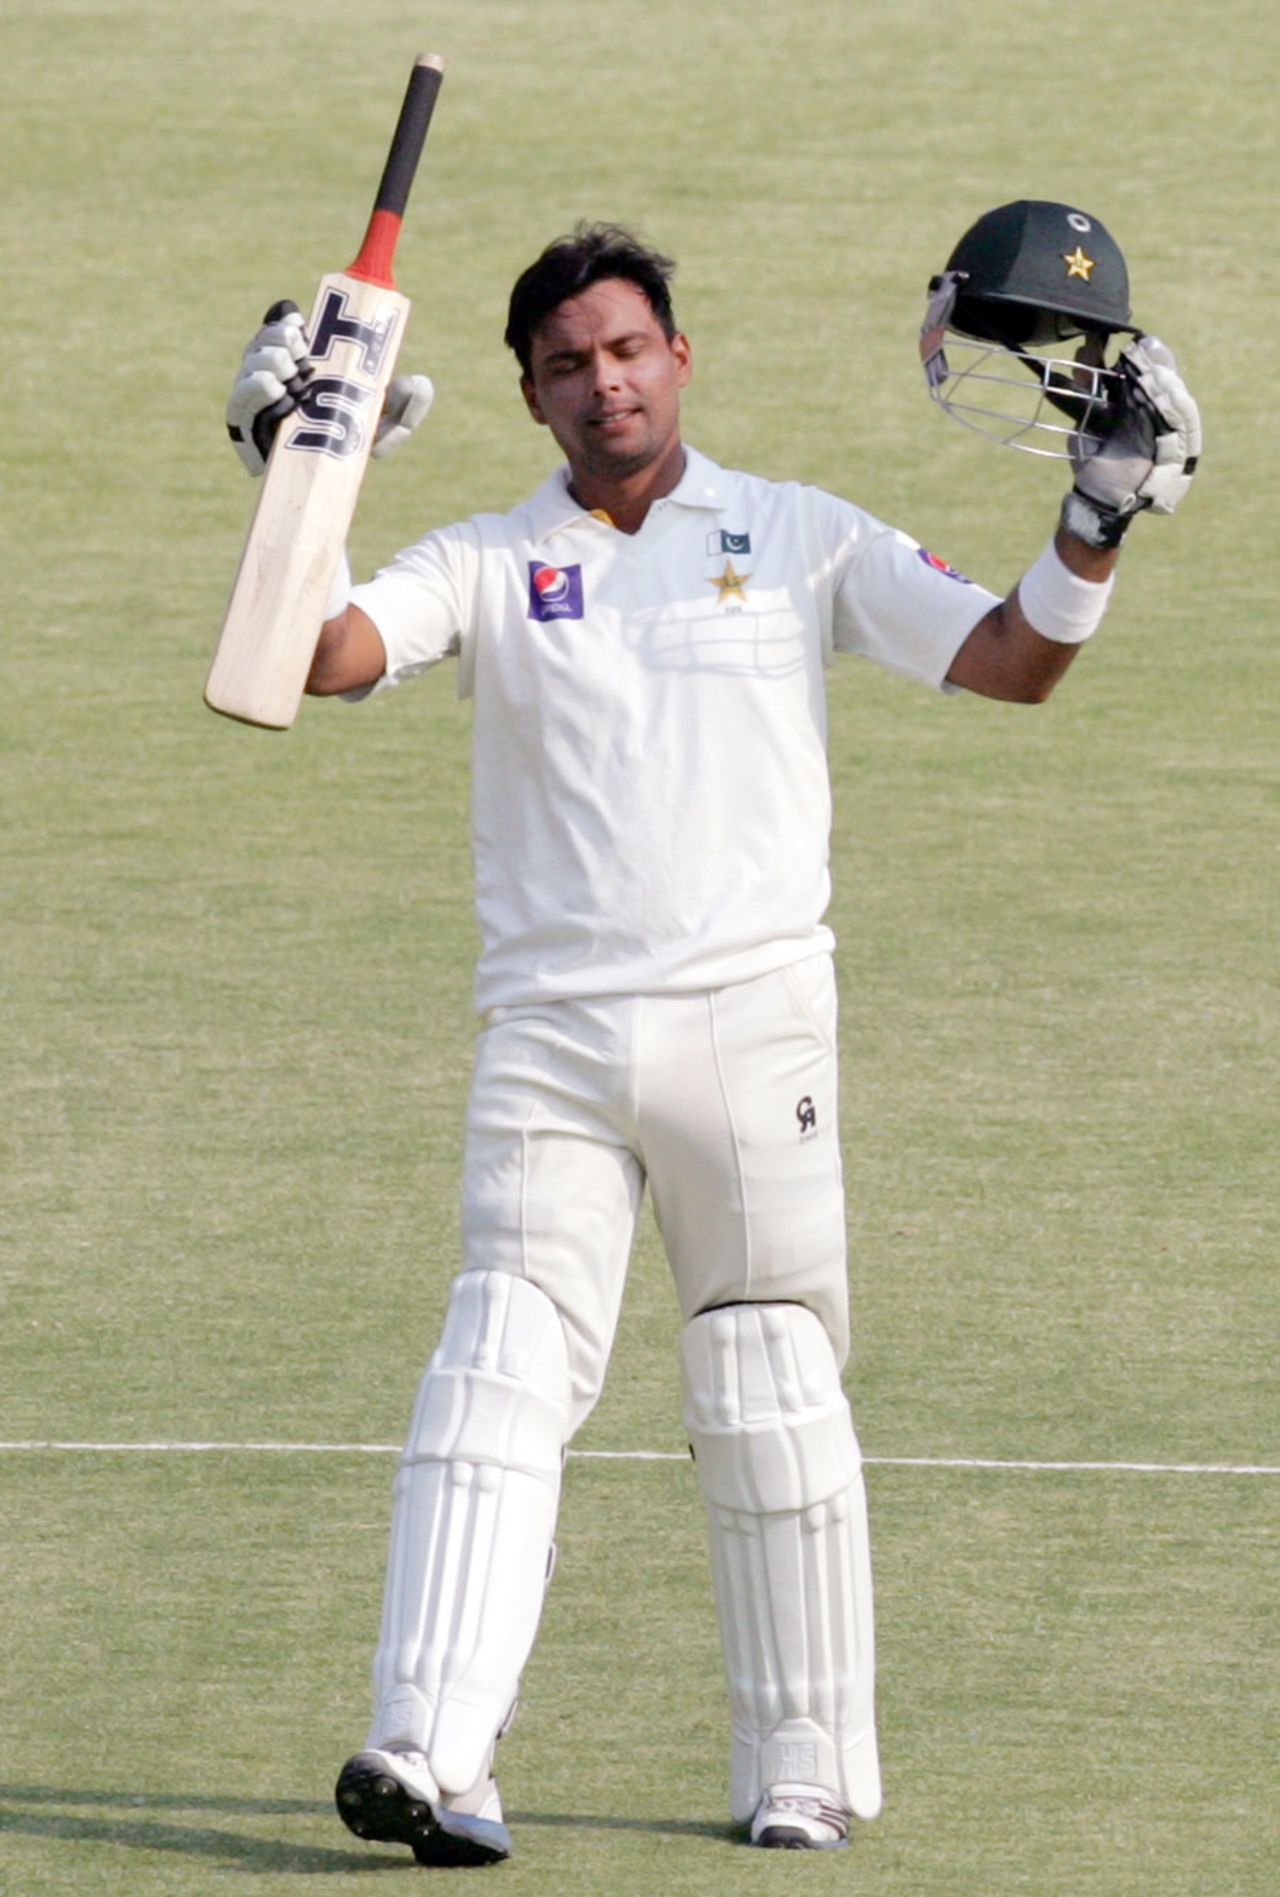 Khurram Manzoor raises the bat after reaching his fifty, Zimbabwe v Pakistan, 2nd Test, Harare, 4th day, September 13, 2013